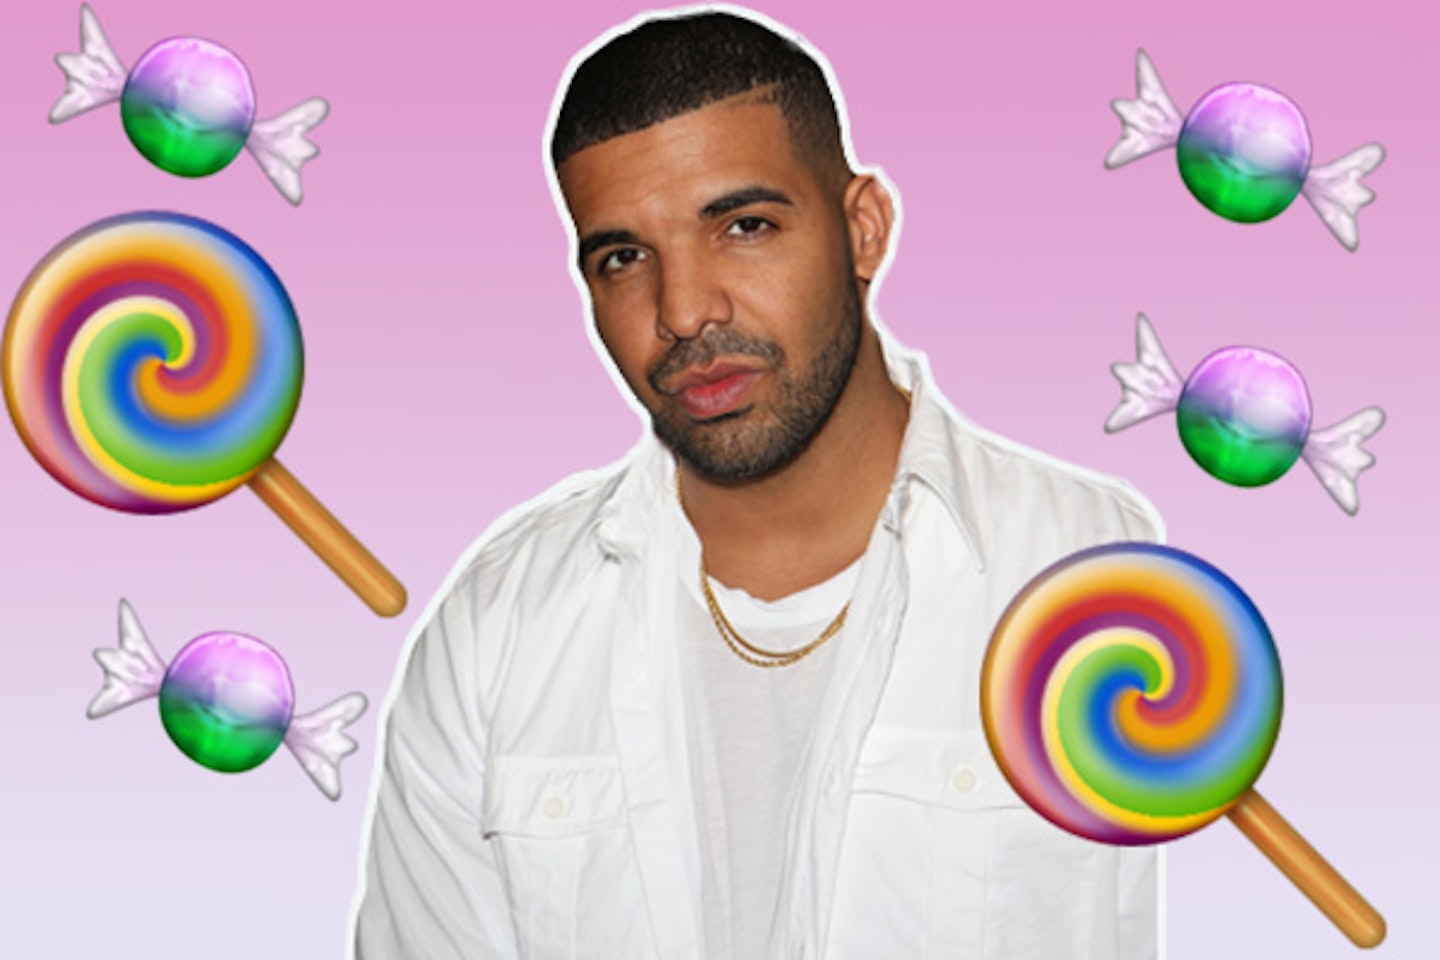 Drake went to the midlands to buy sweets